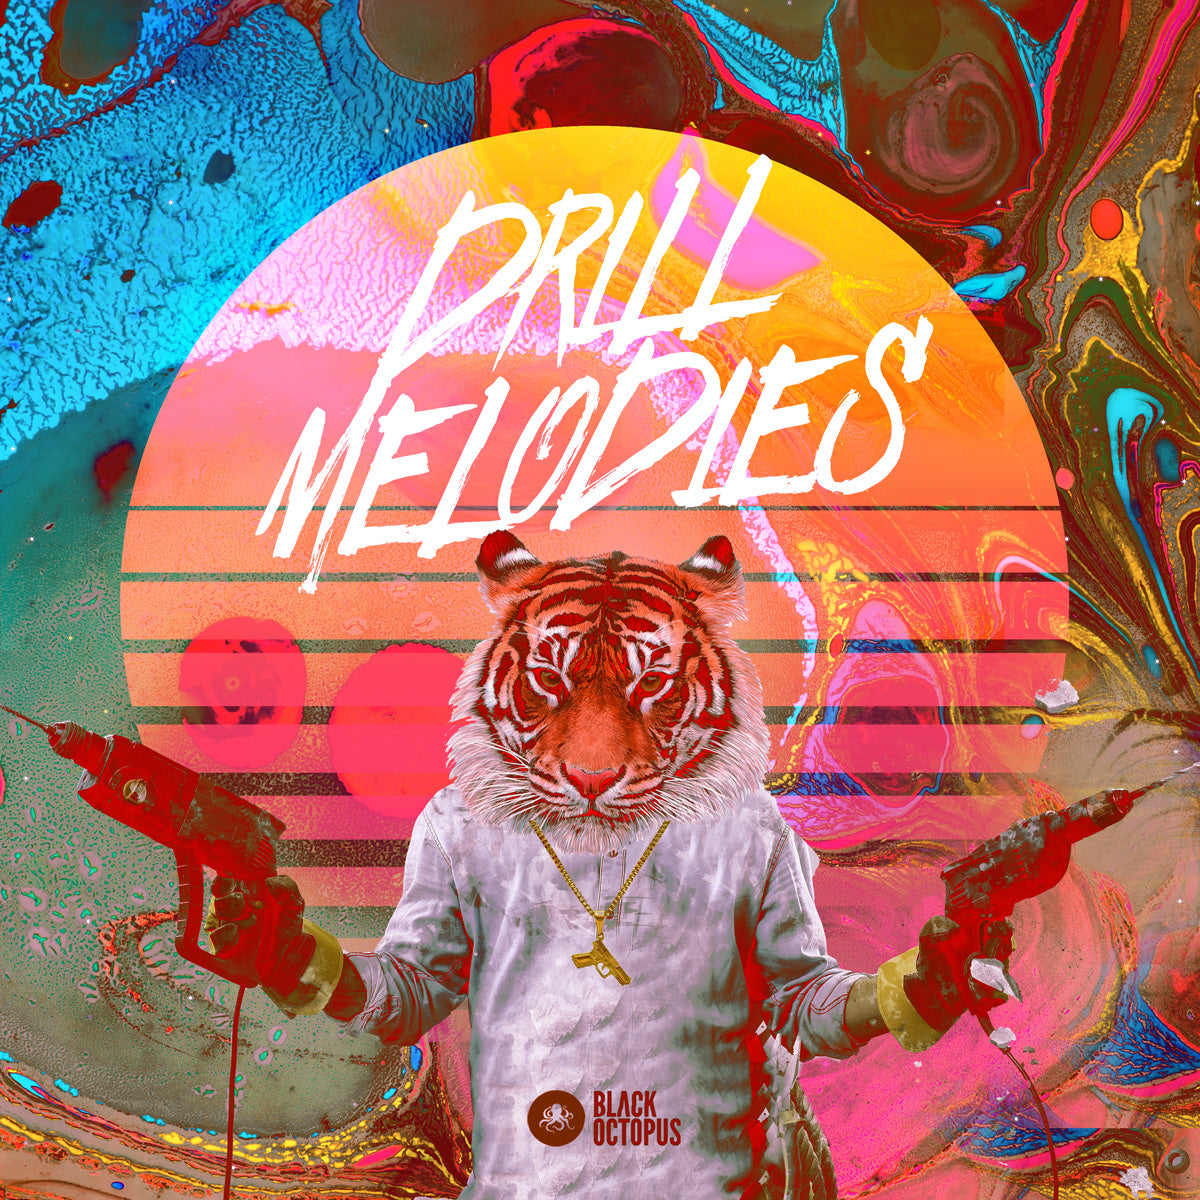 A bright colourful background with the words 'Drill Melodies' over the top. At the forefront of the image is a man holding a drill in each hand with the head of a tiger.